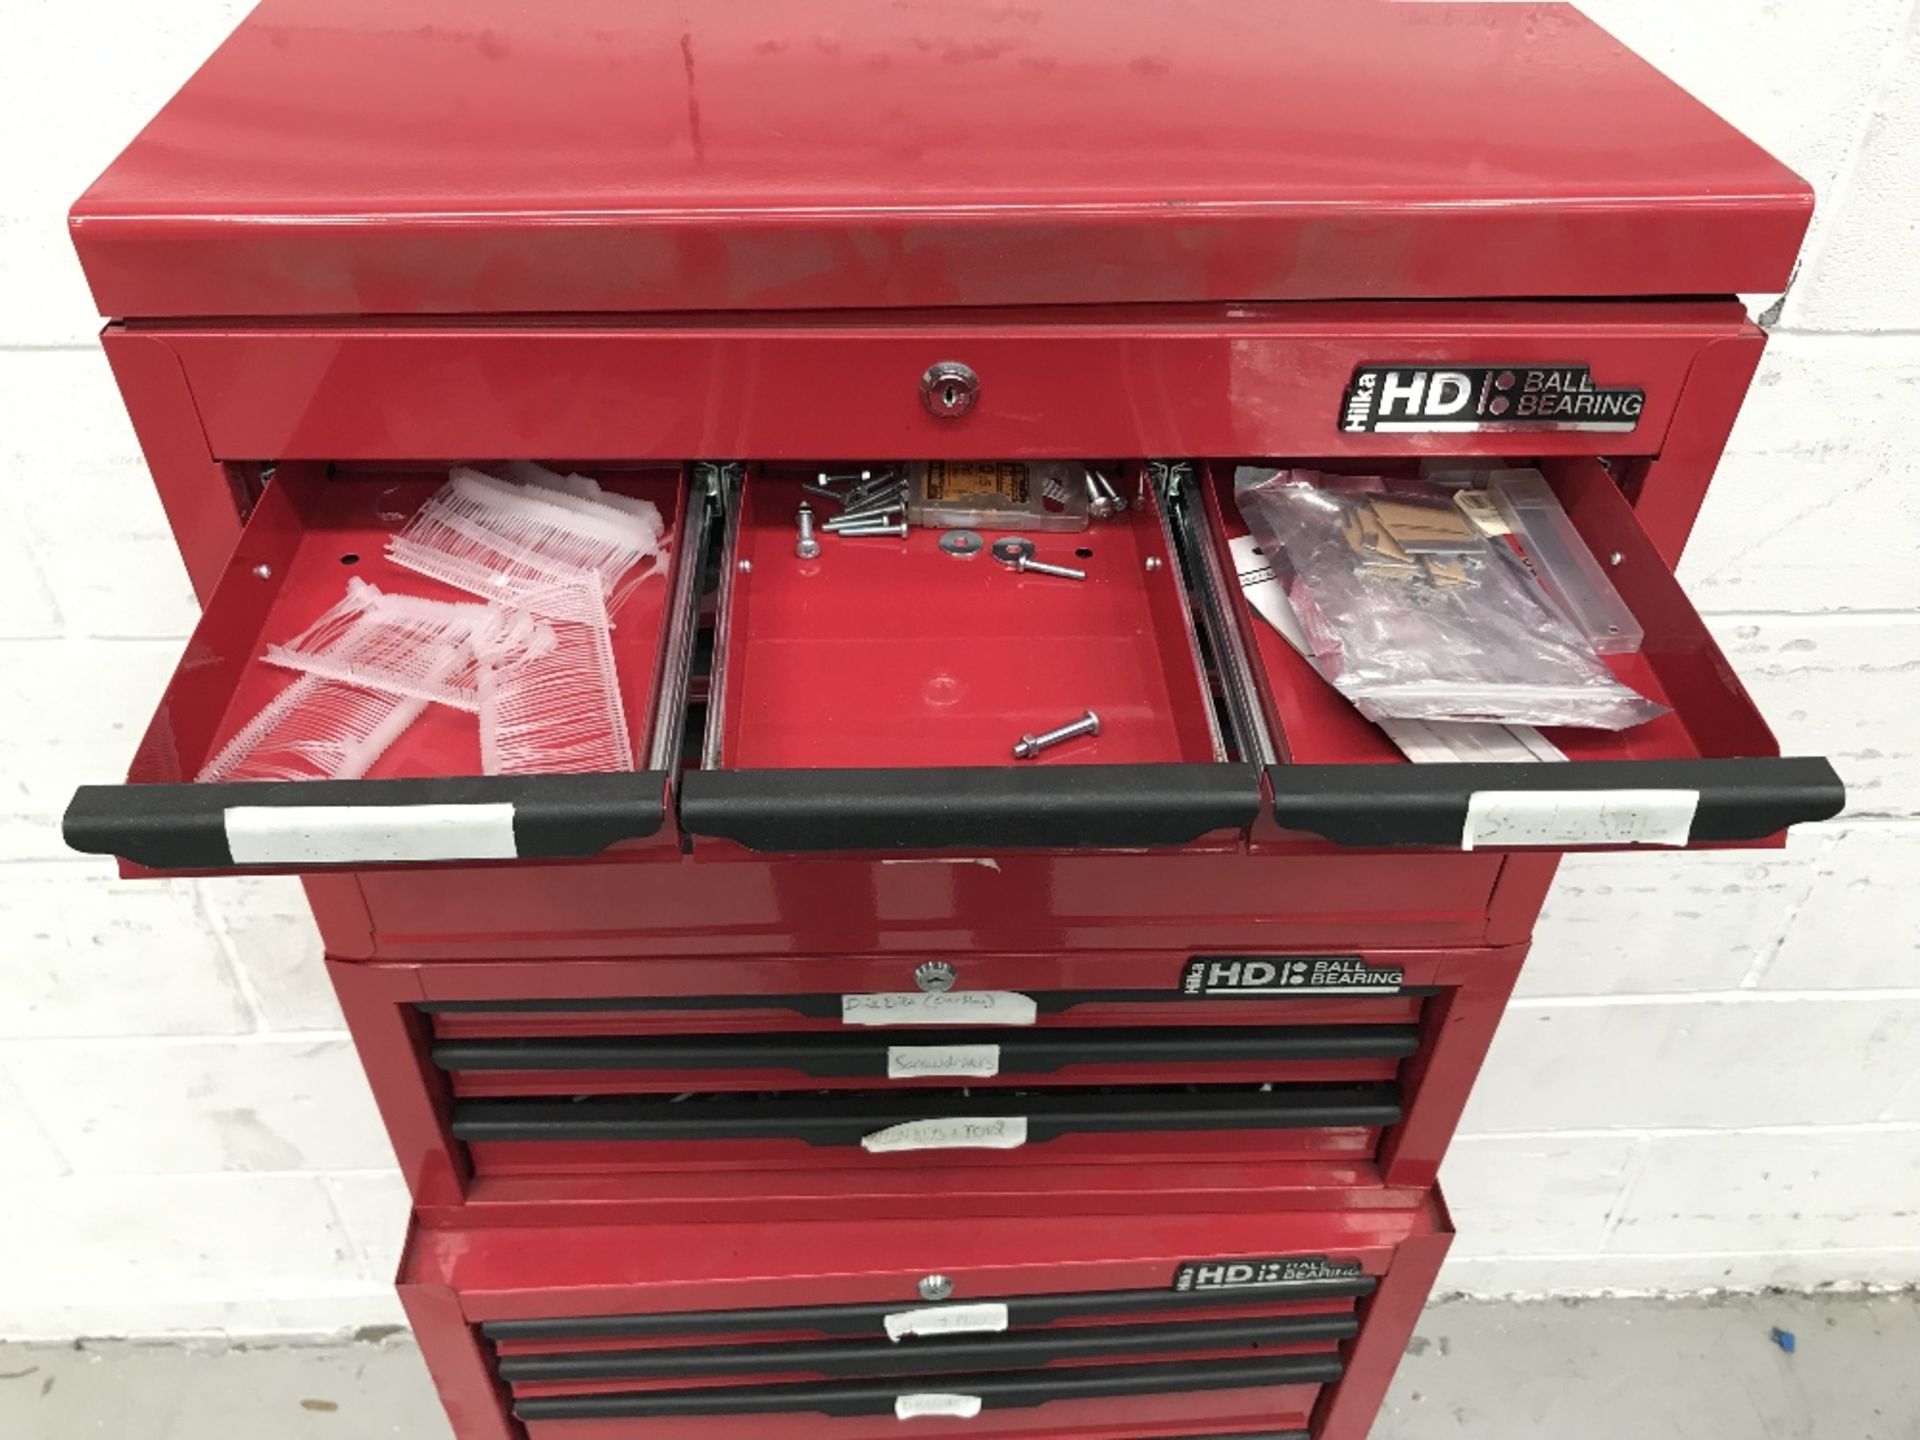 Hilka HD Ball Bearing Tool Chest and Contents - Image 2 of 13